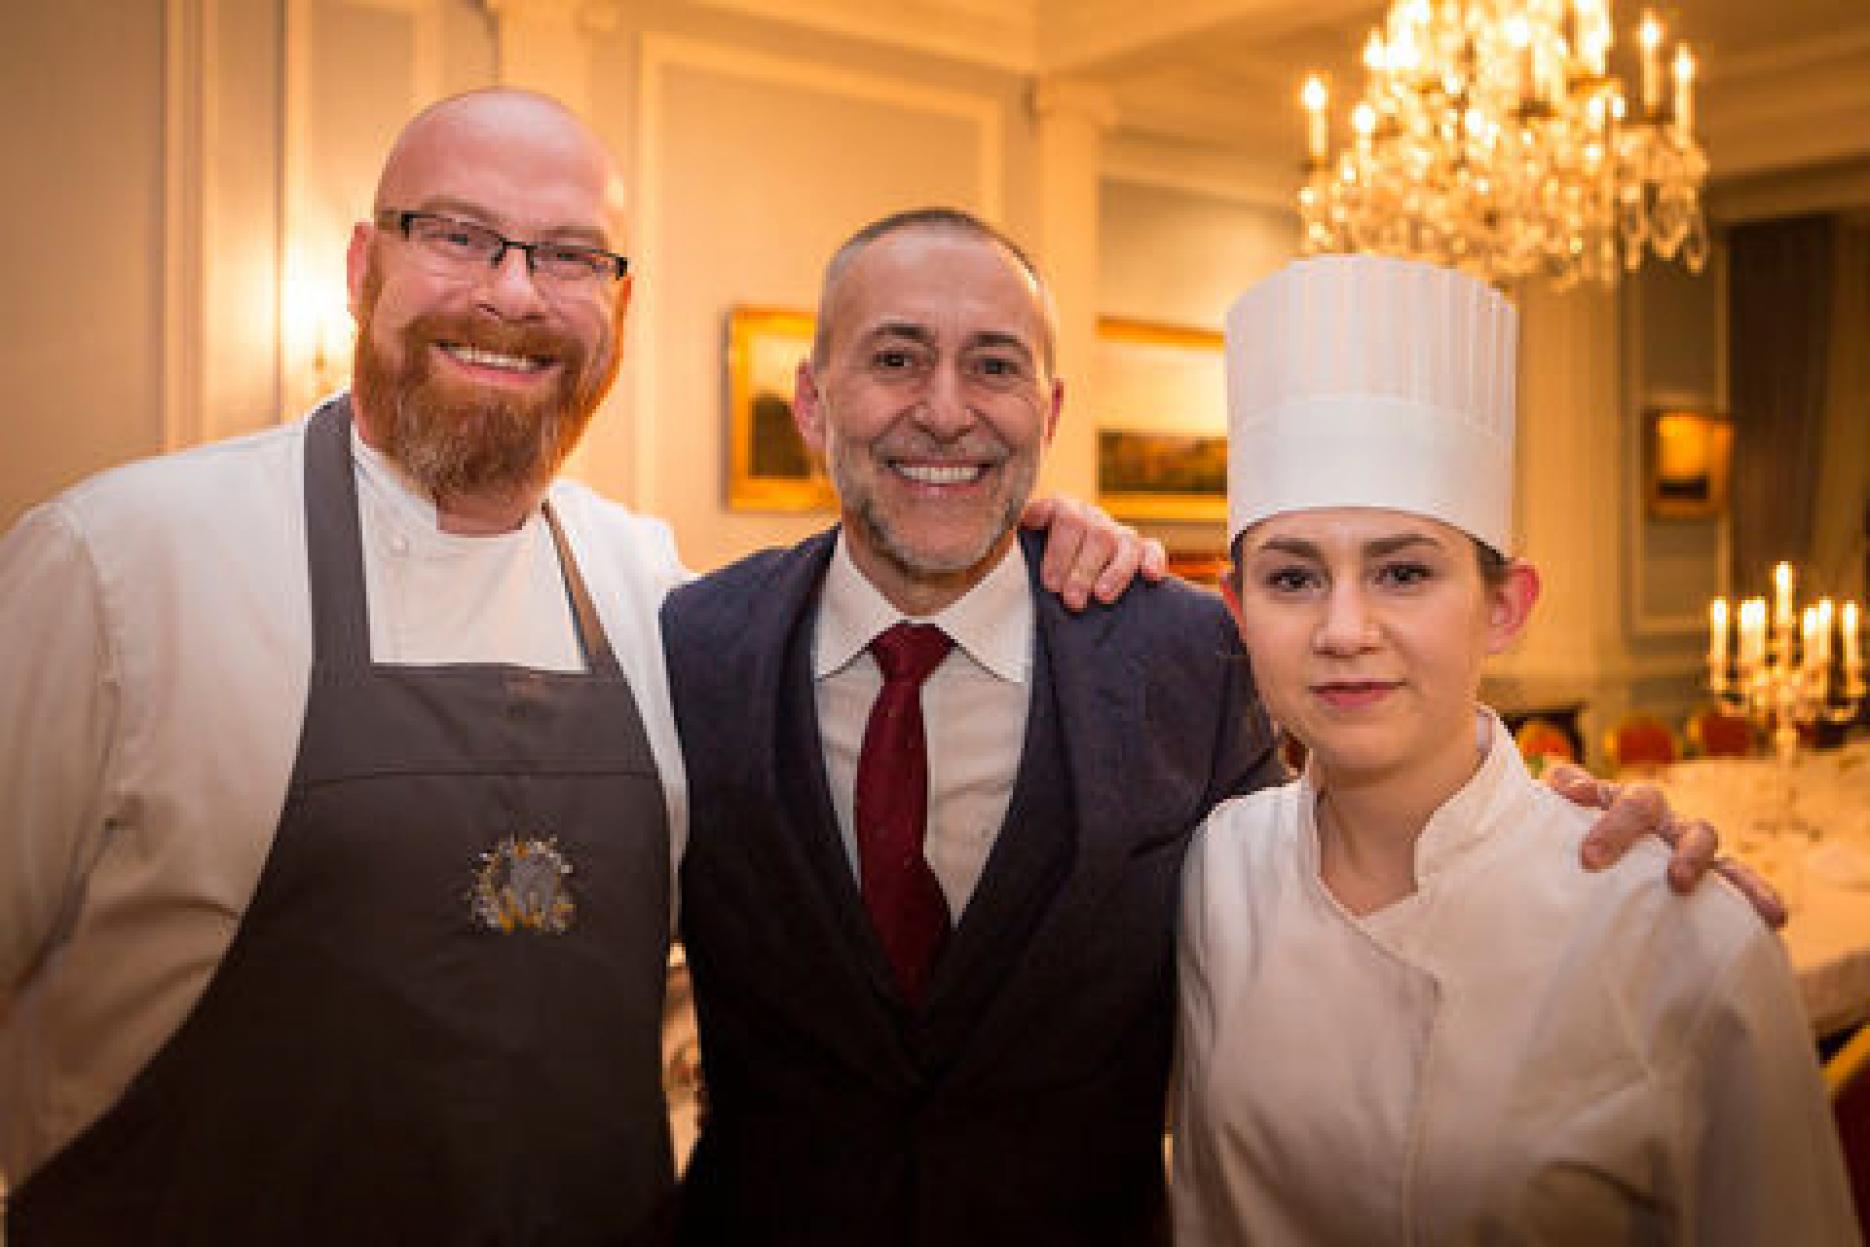 Young National Chef of the Year serves dinner for Michel Roux Jr and friends